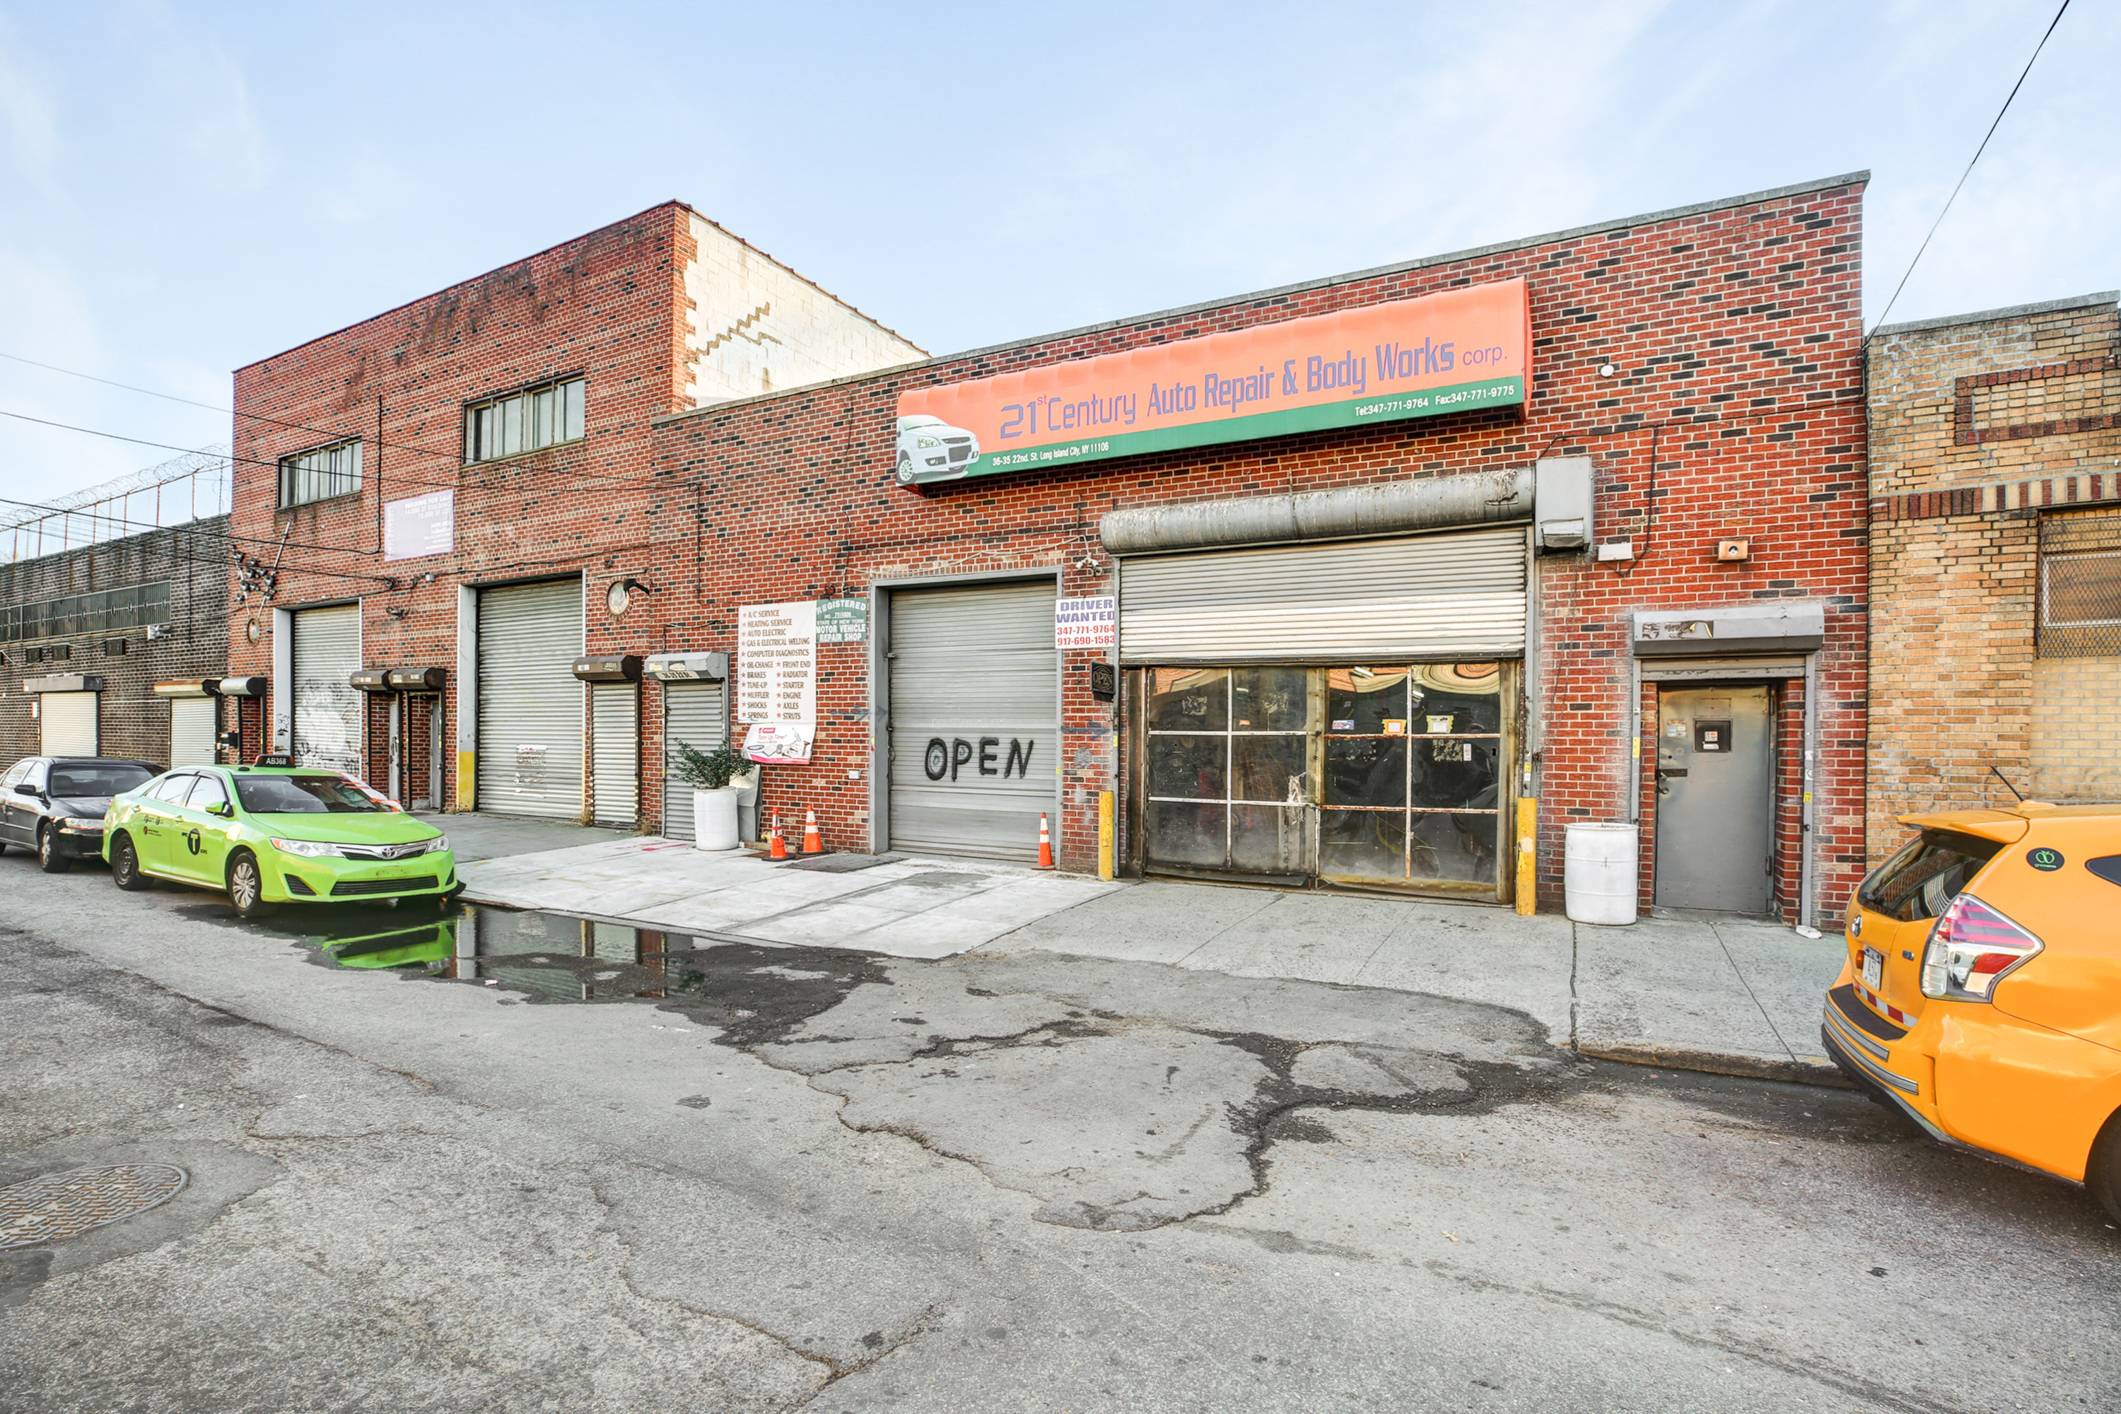 Long Island City: 10,000 SF LOT + 14,000 SF Building - M1-1 Zoned Industrial Opportunity Zone For Sale - Delivered Vacant!